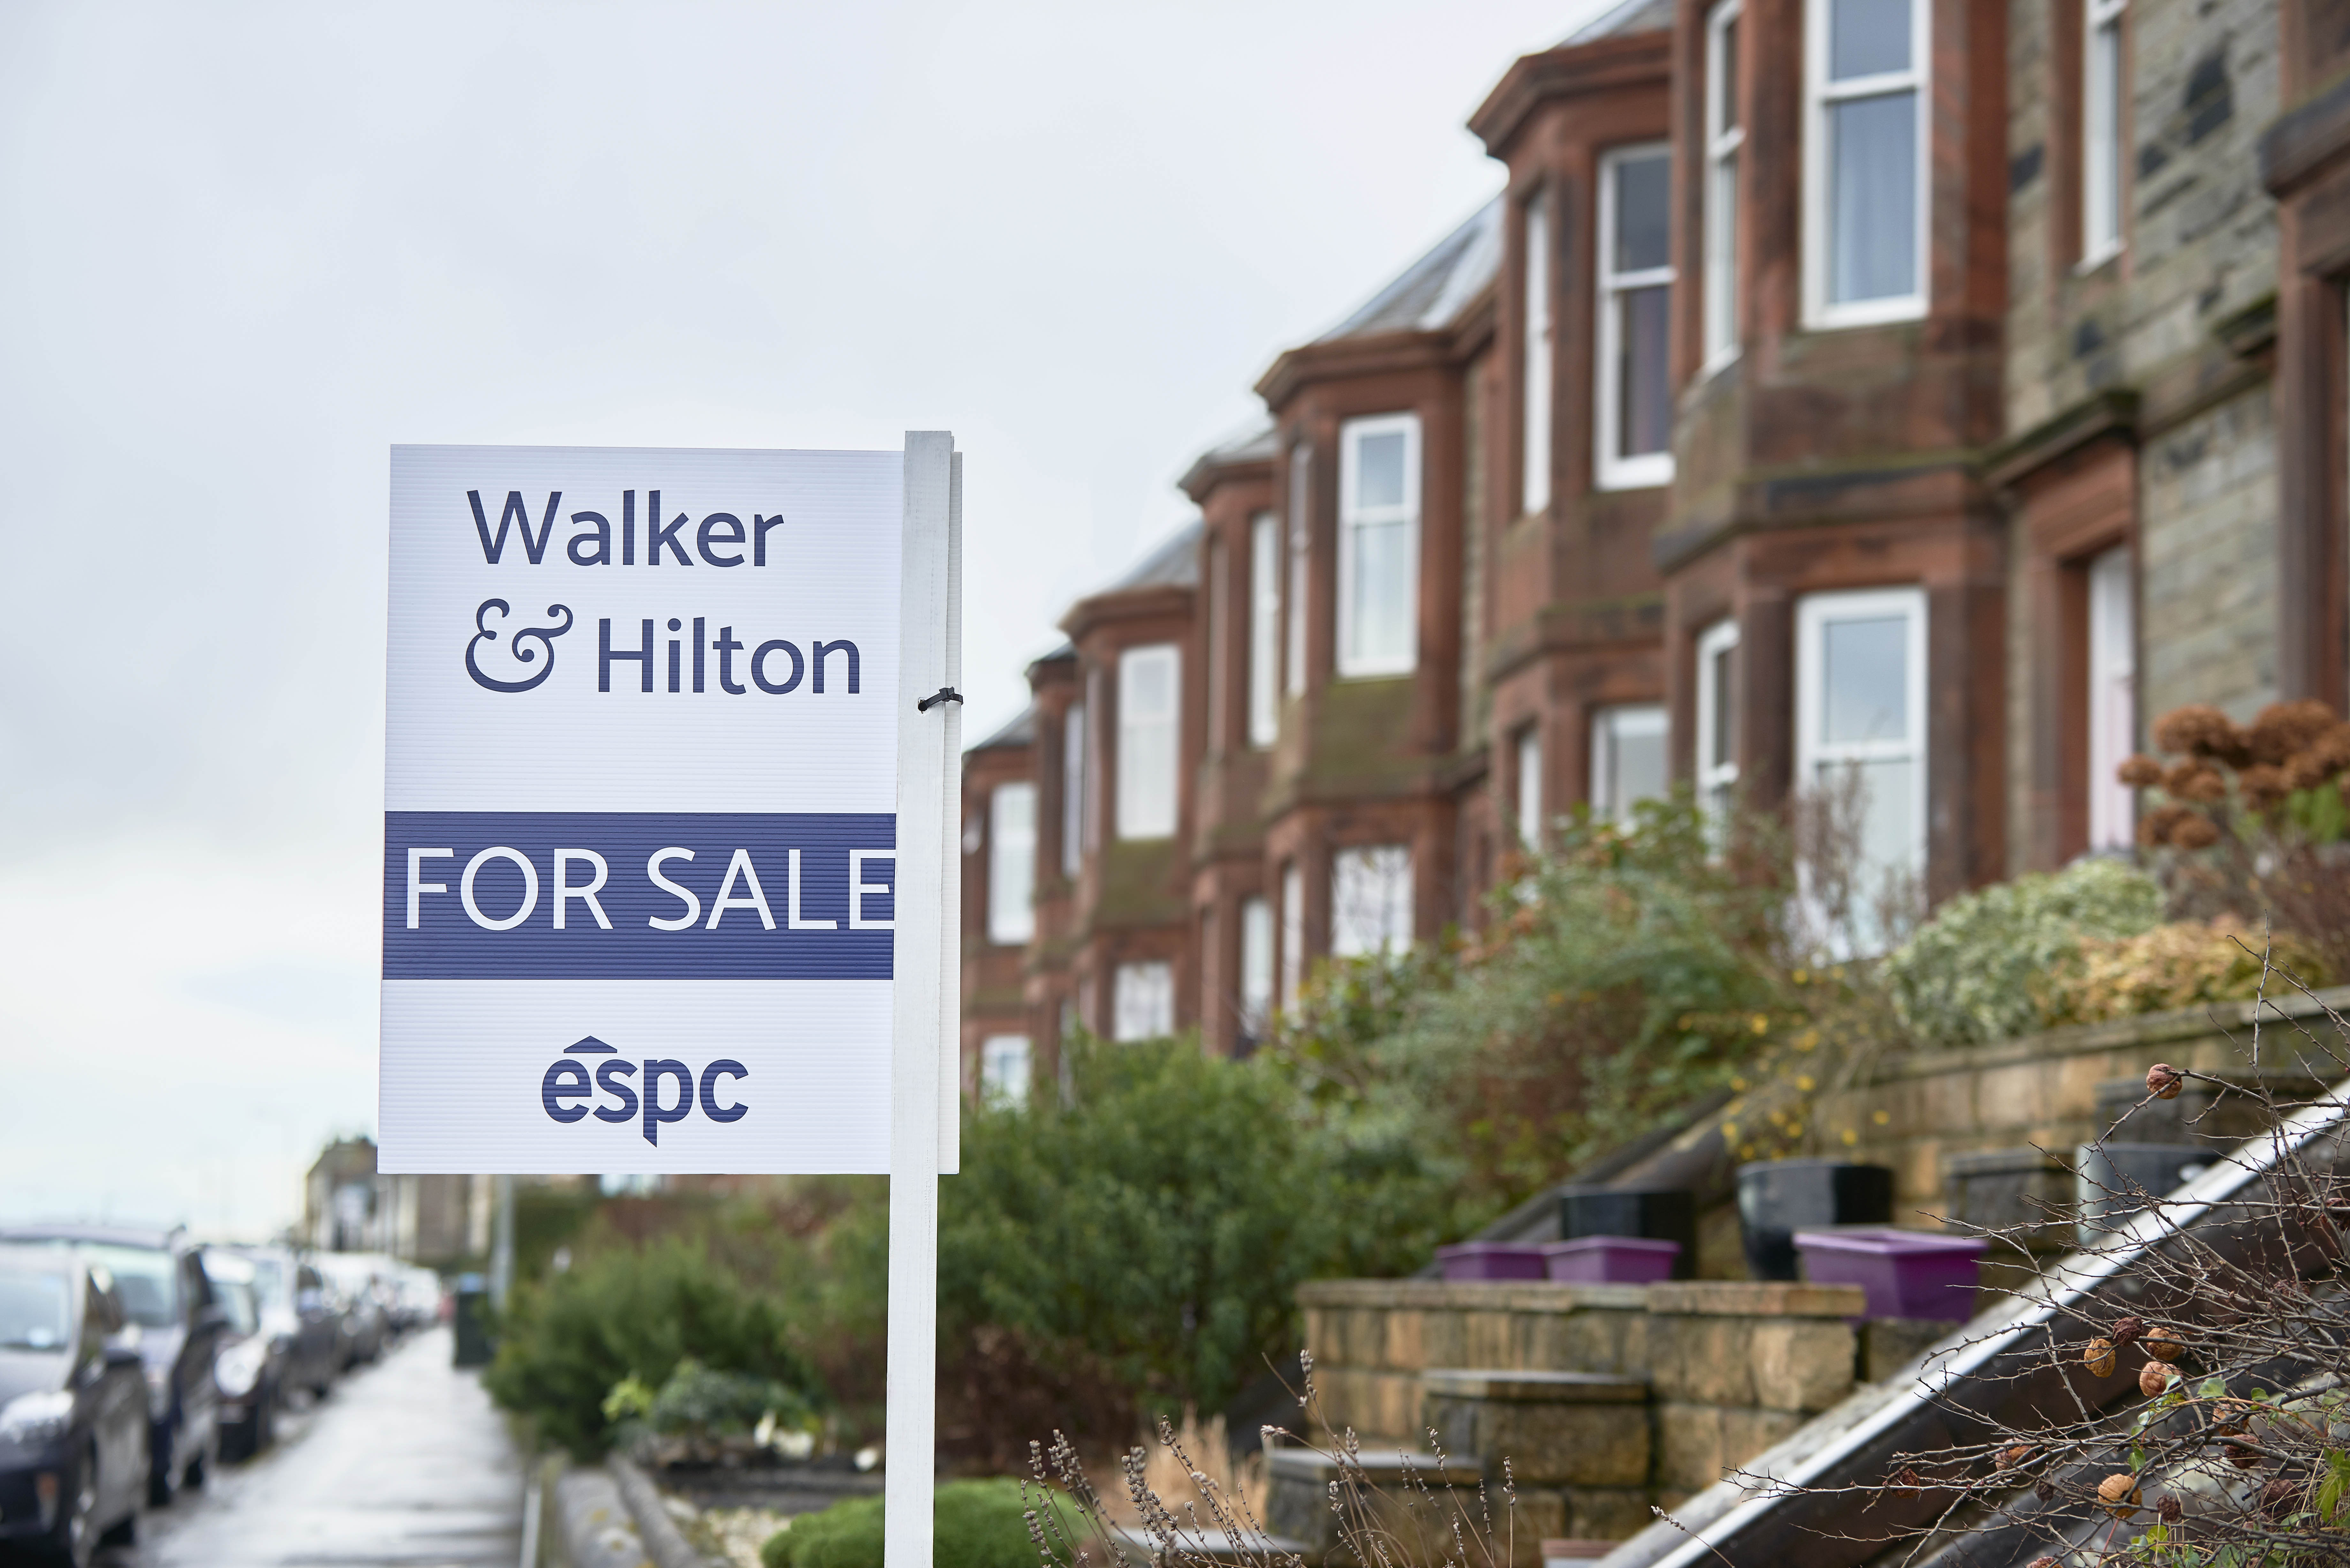 ESPC: Growth in new property listings slows as selling prices increase year-on-year